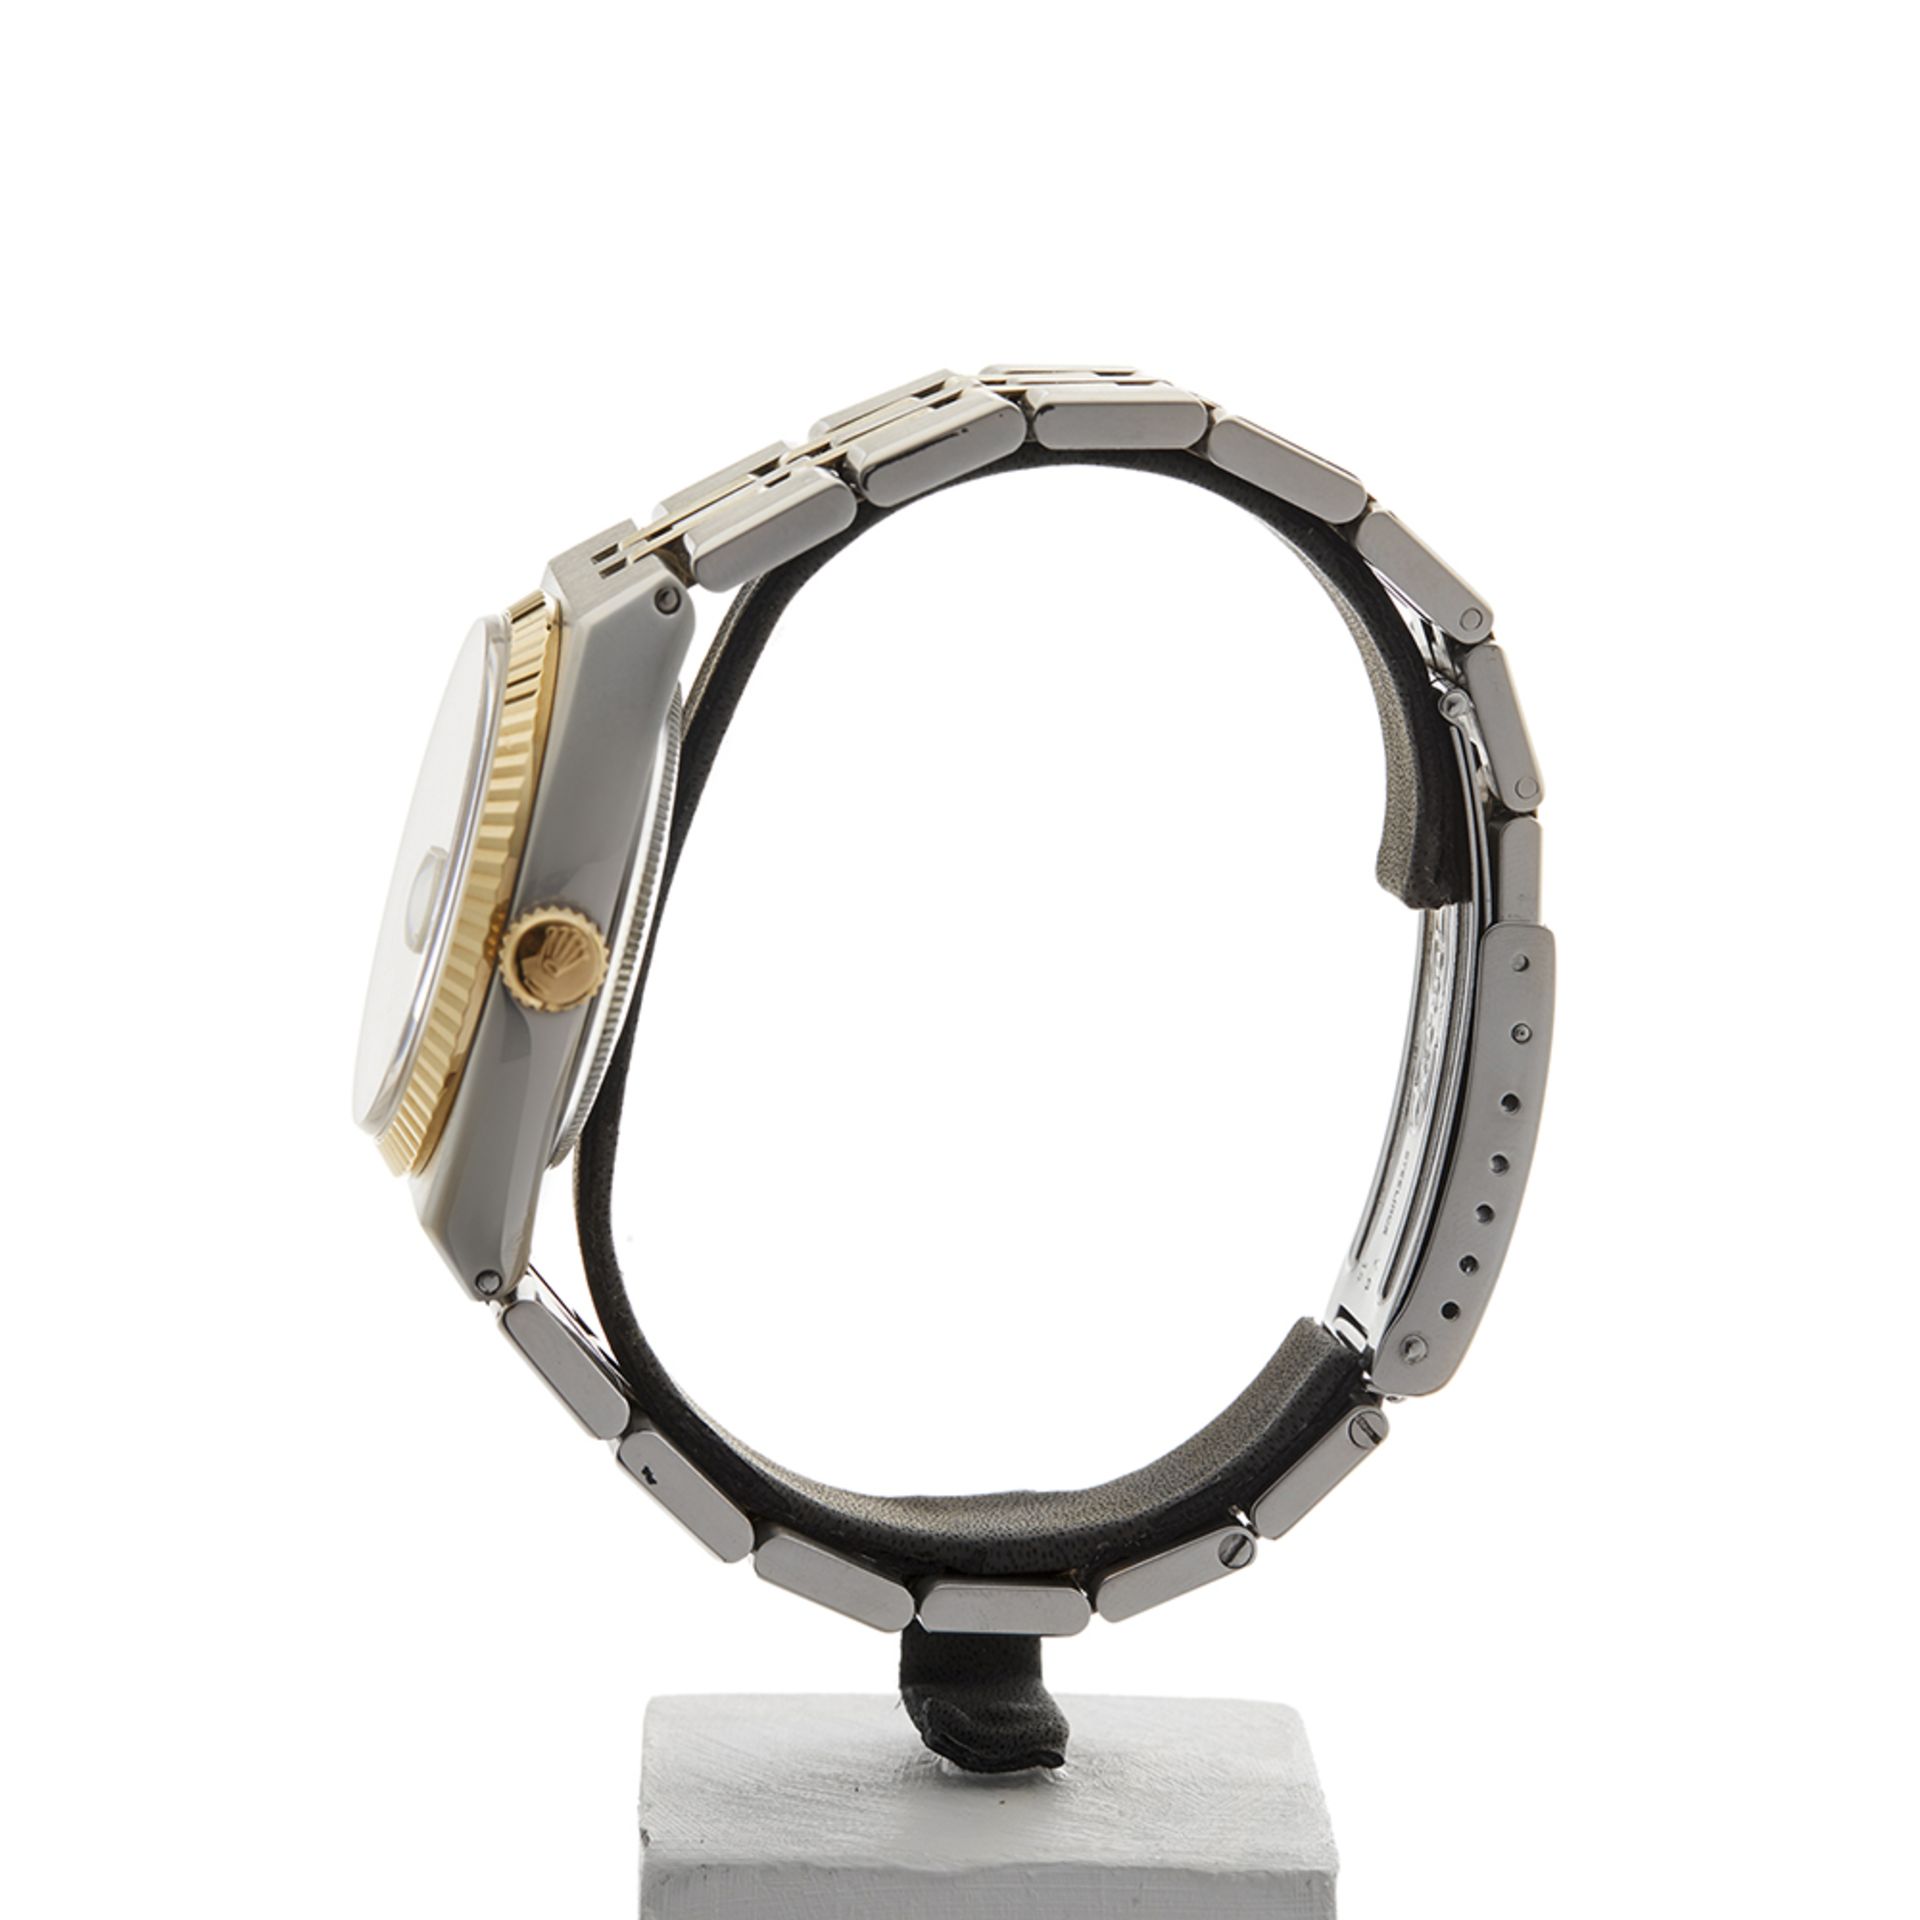 Oyster Quartz 36mm Stainless Steel & 18k Yellow Gold - 17013 - Image 5 of 9